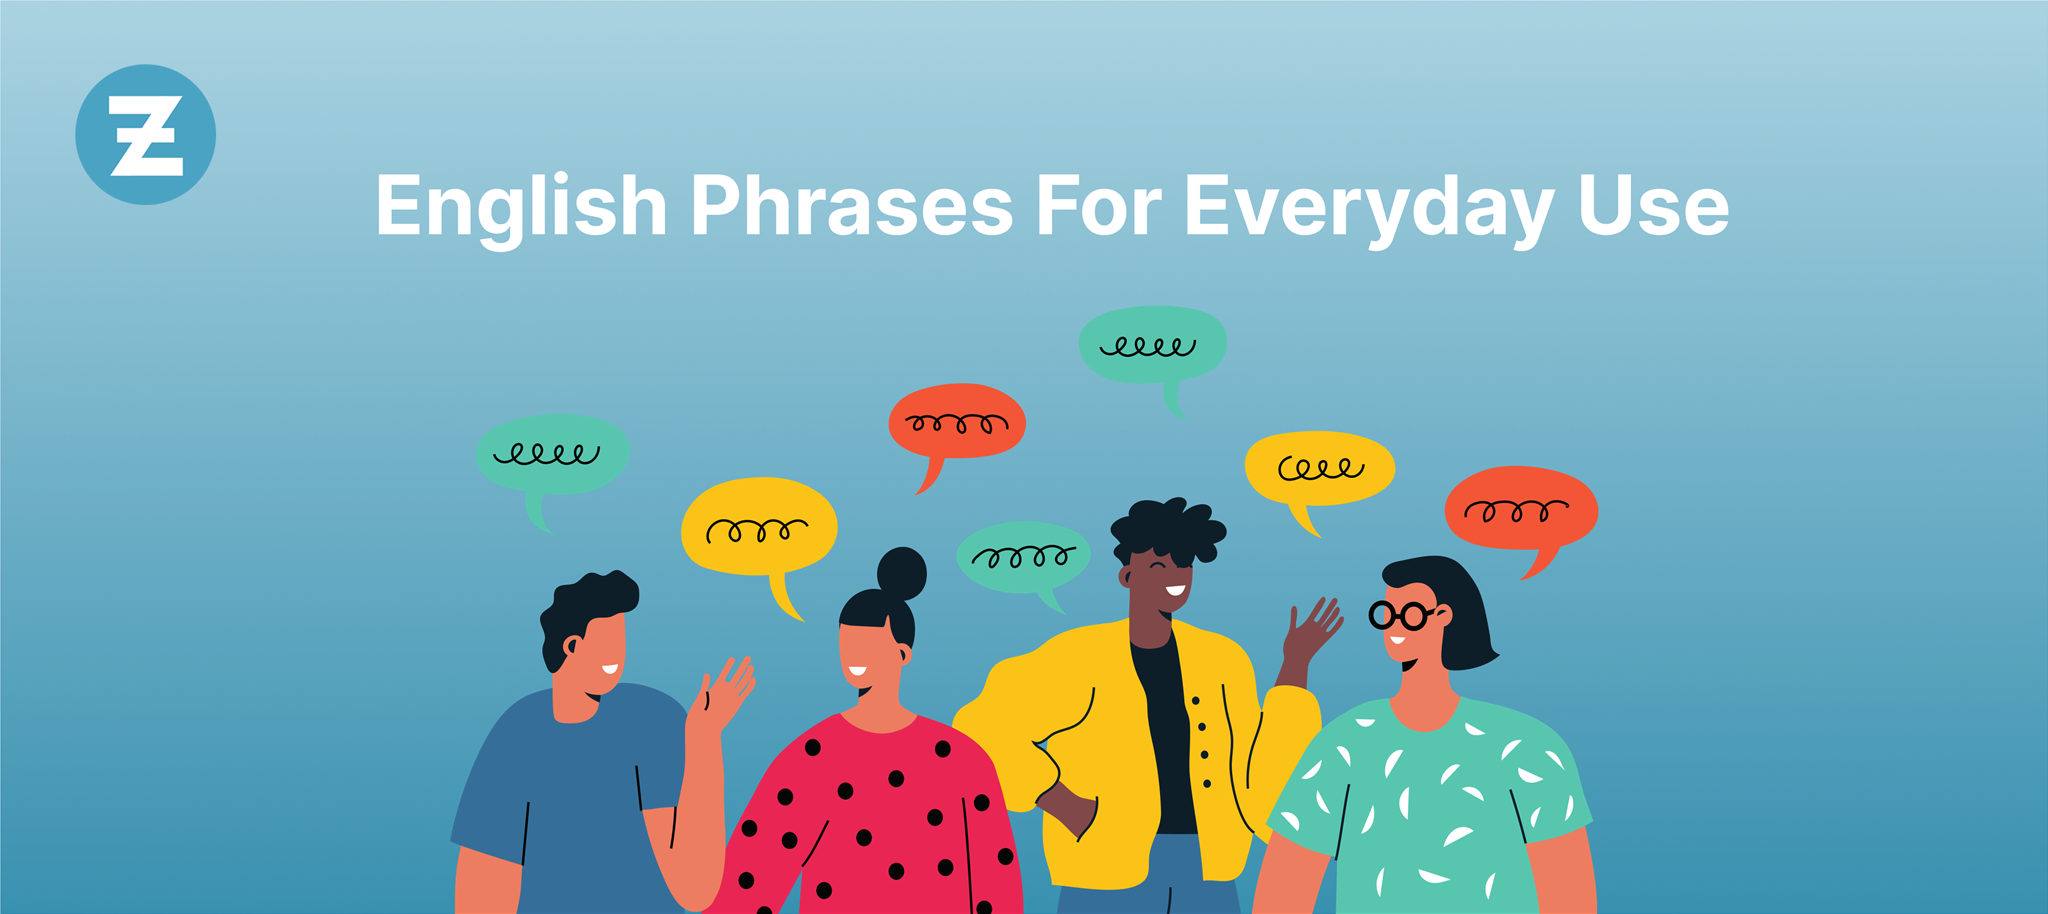 Common English Phrases for Everyday Use